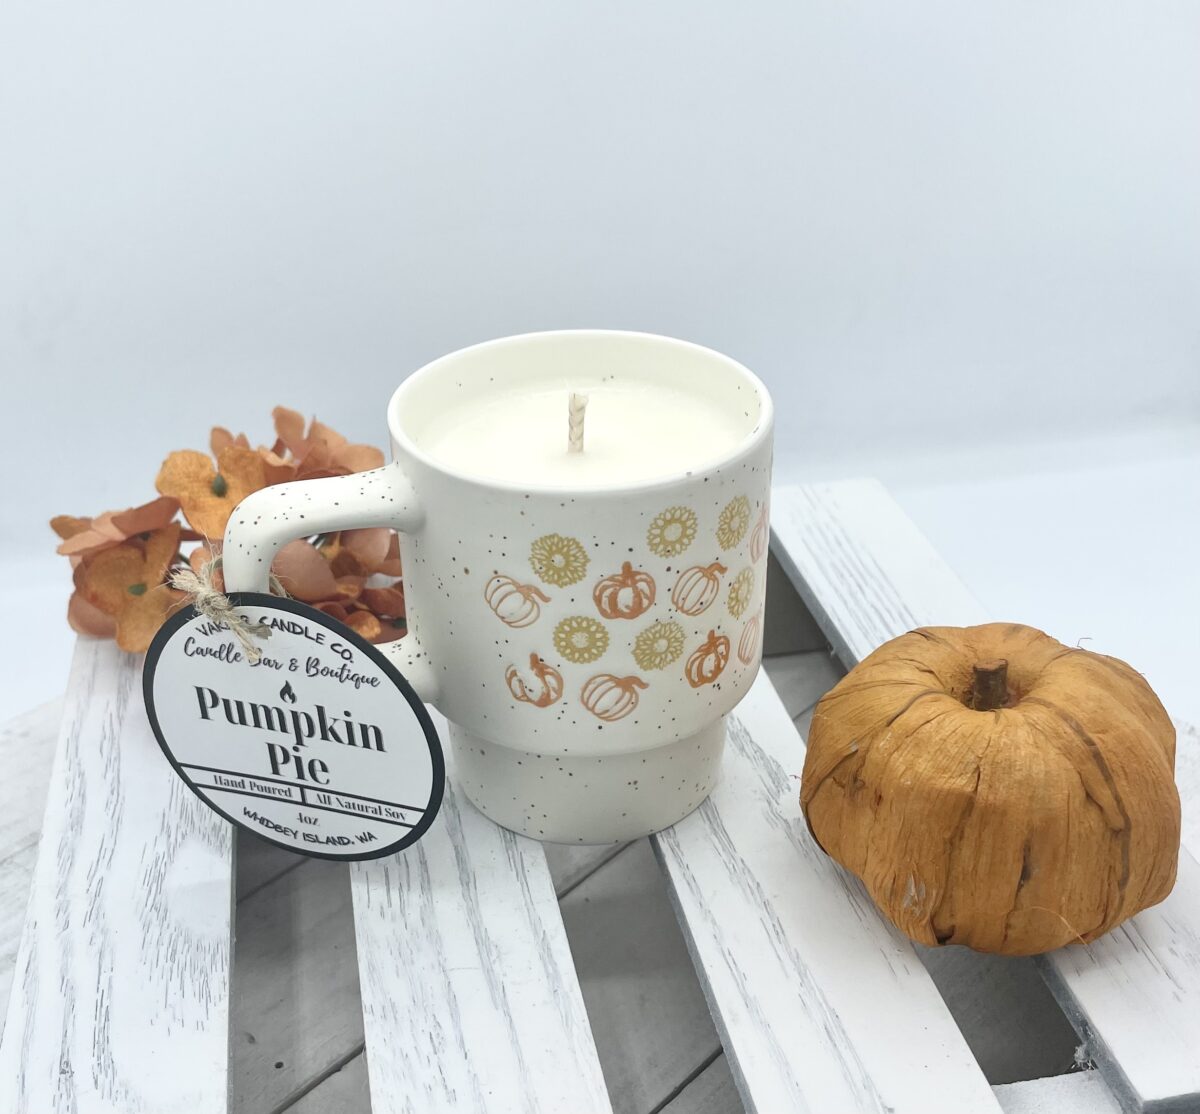 Scented soy candle in pumpkin pie, in a ceramic mug with cotton wick.